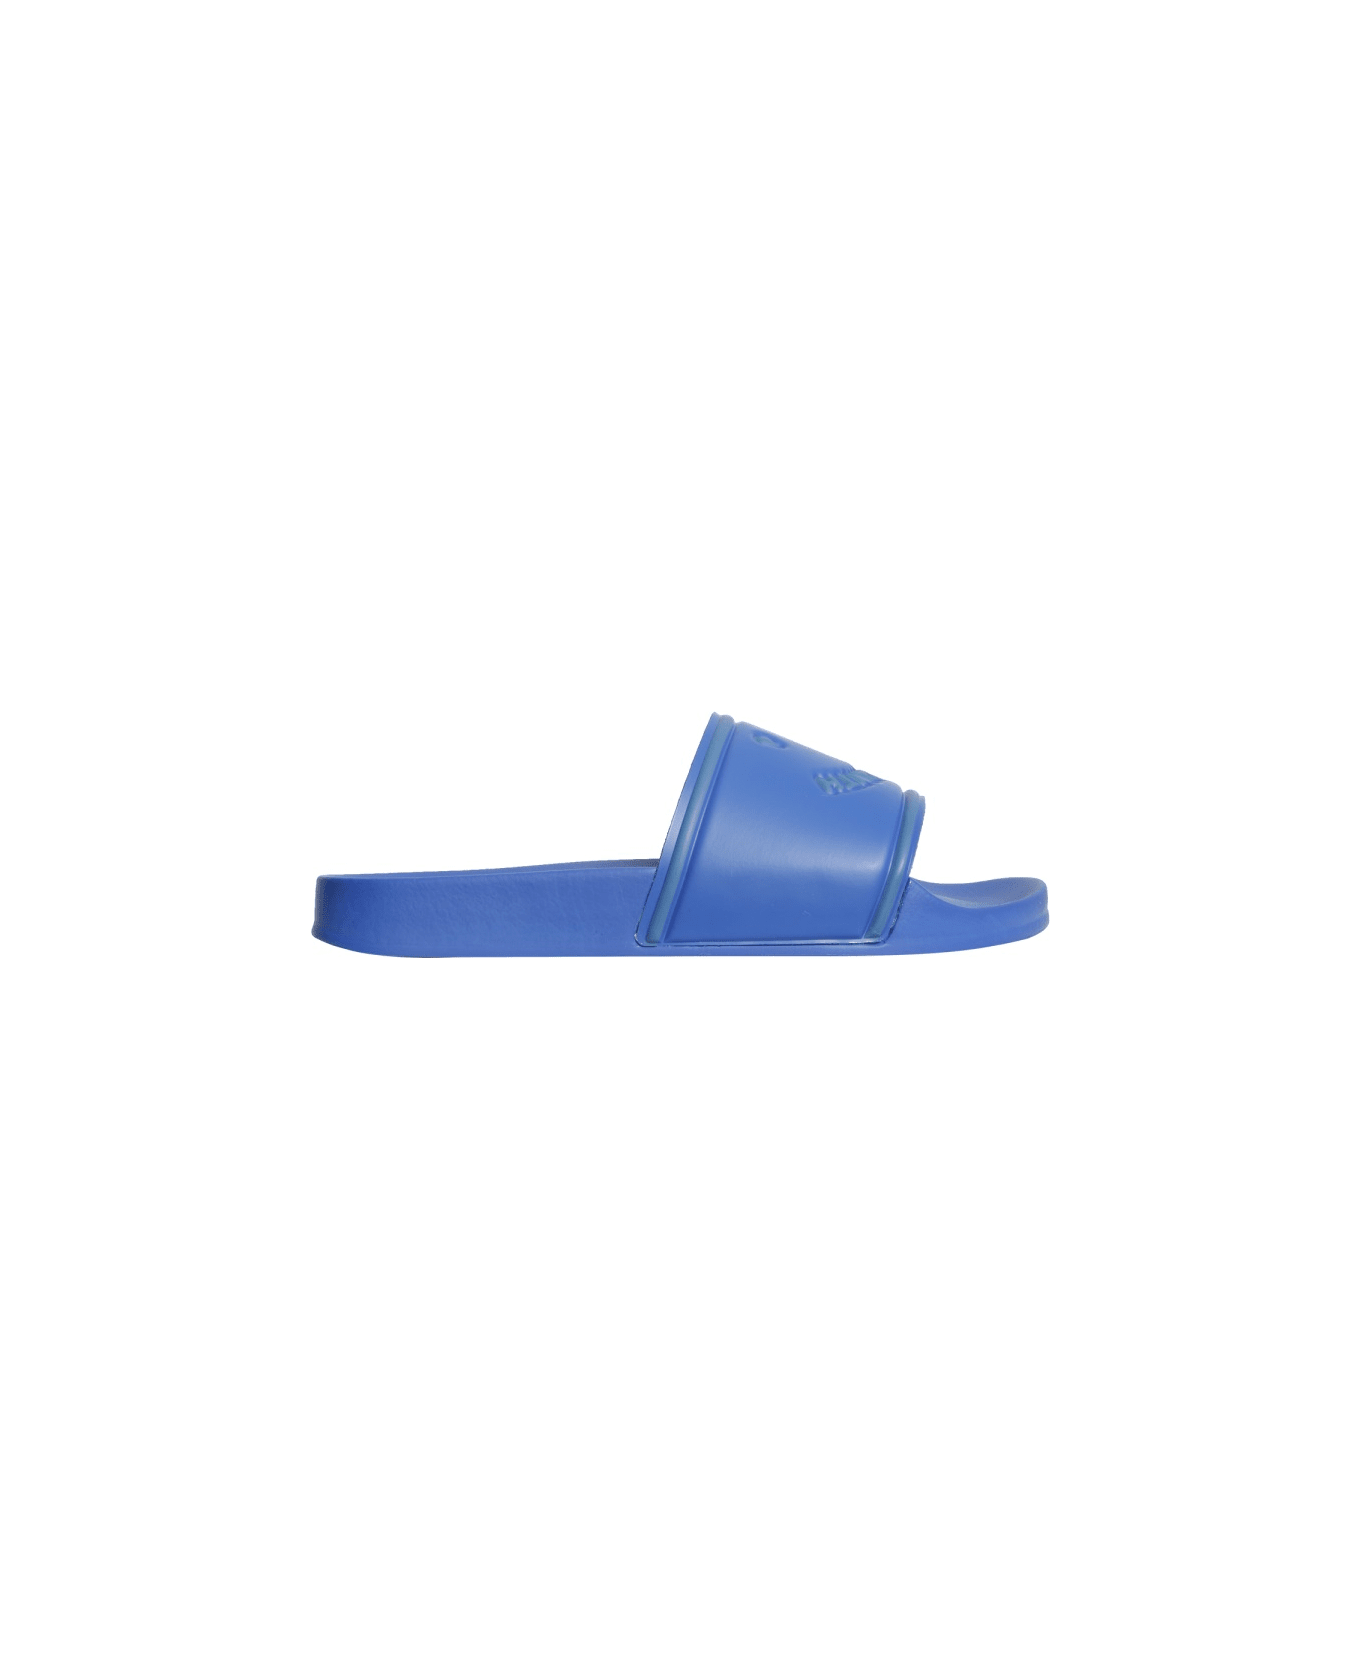 PS by Paul Smith Summit Slide Sandals - BLUE